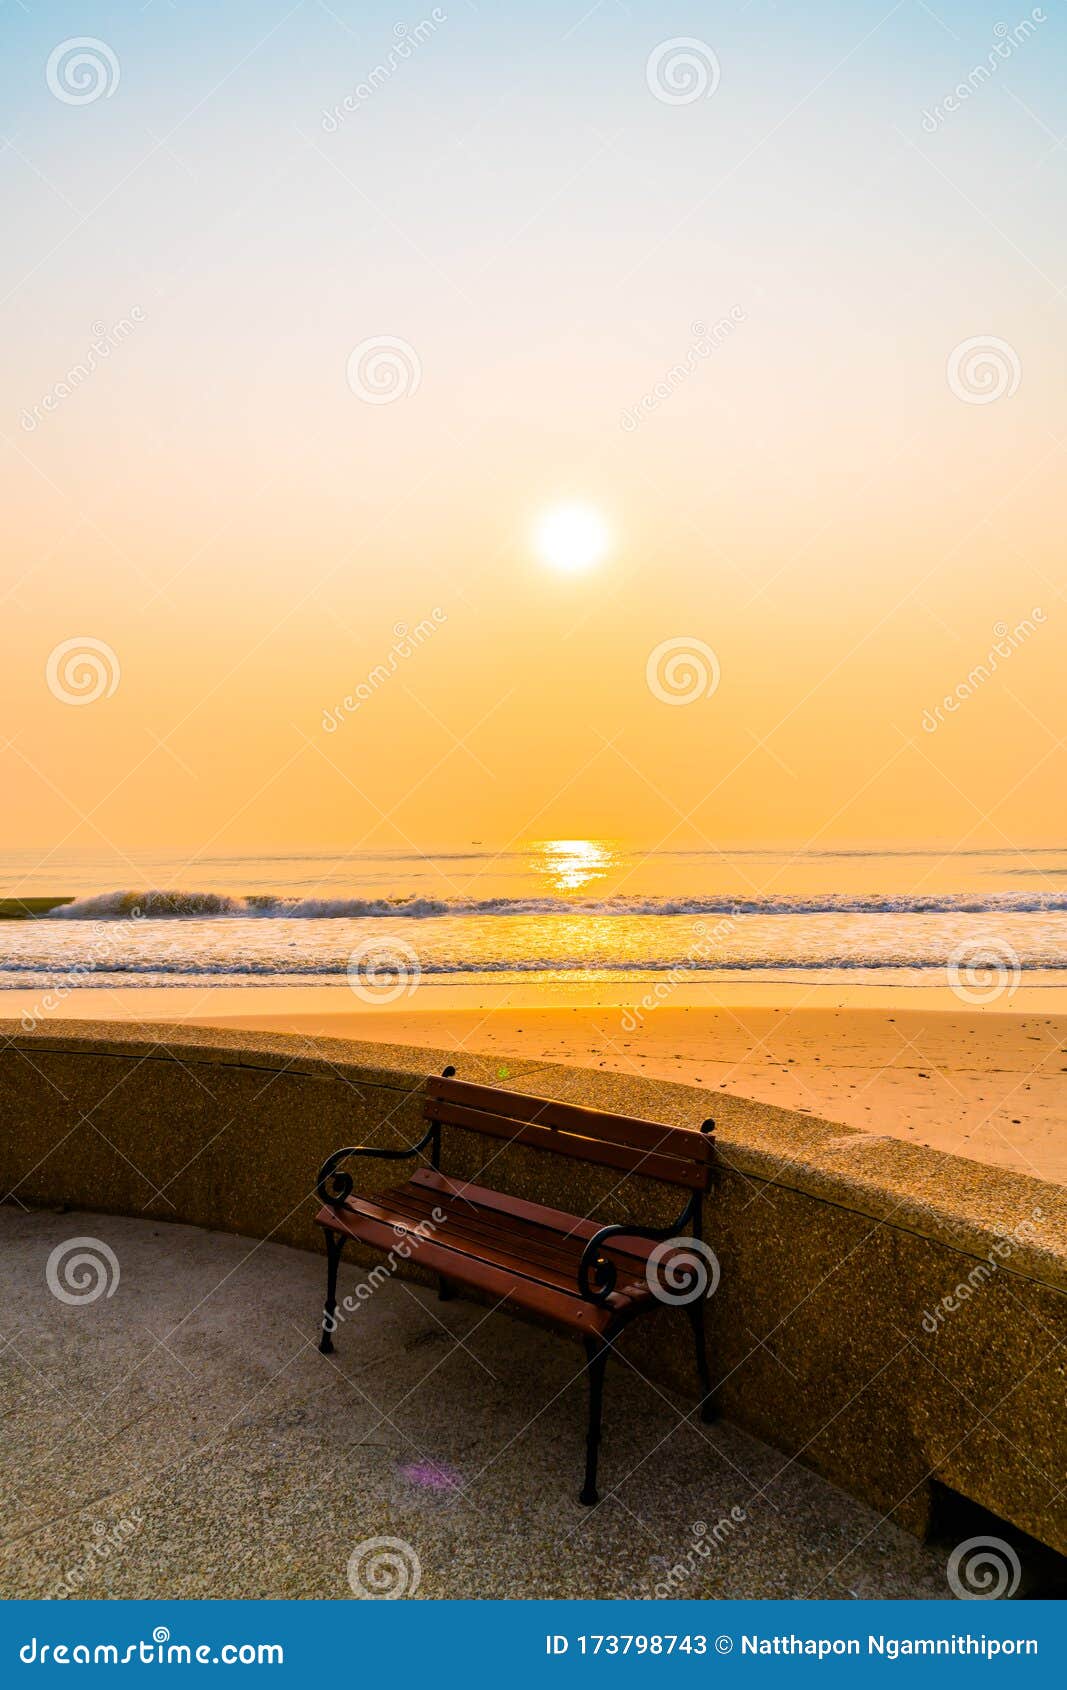 Empty Bench with Sea Beach Background Stock Image - Image of calm